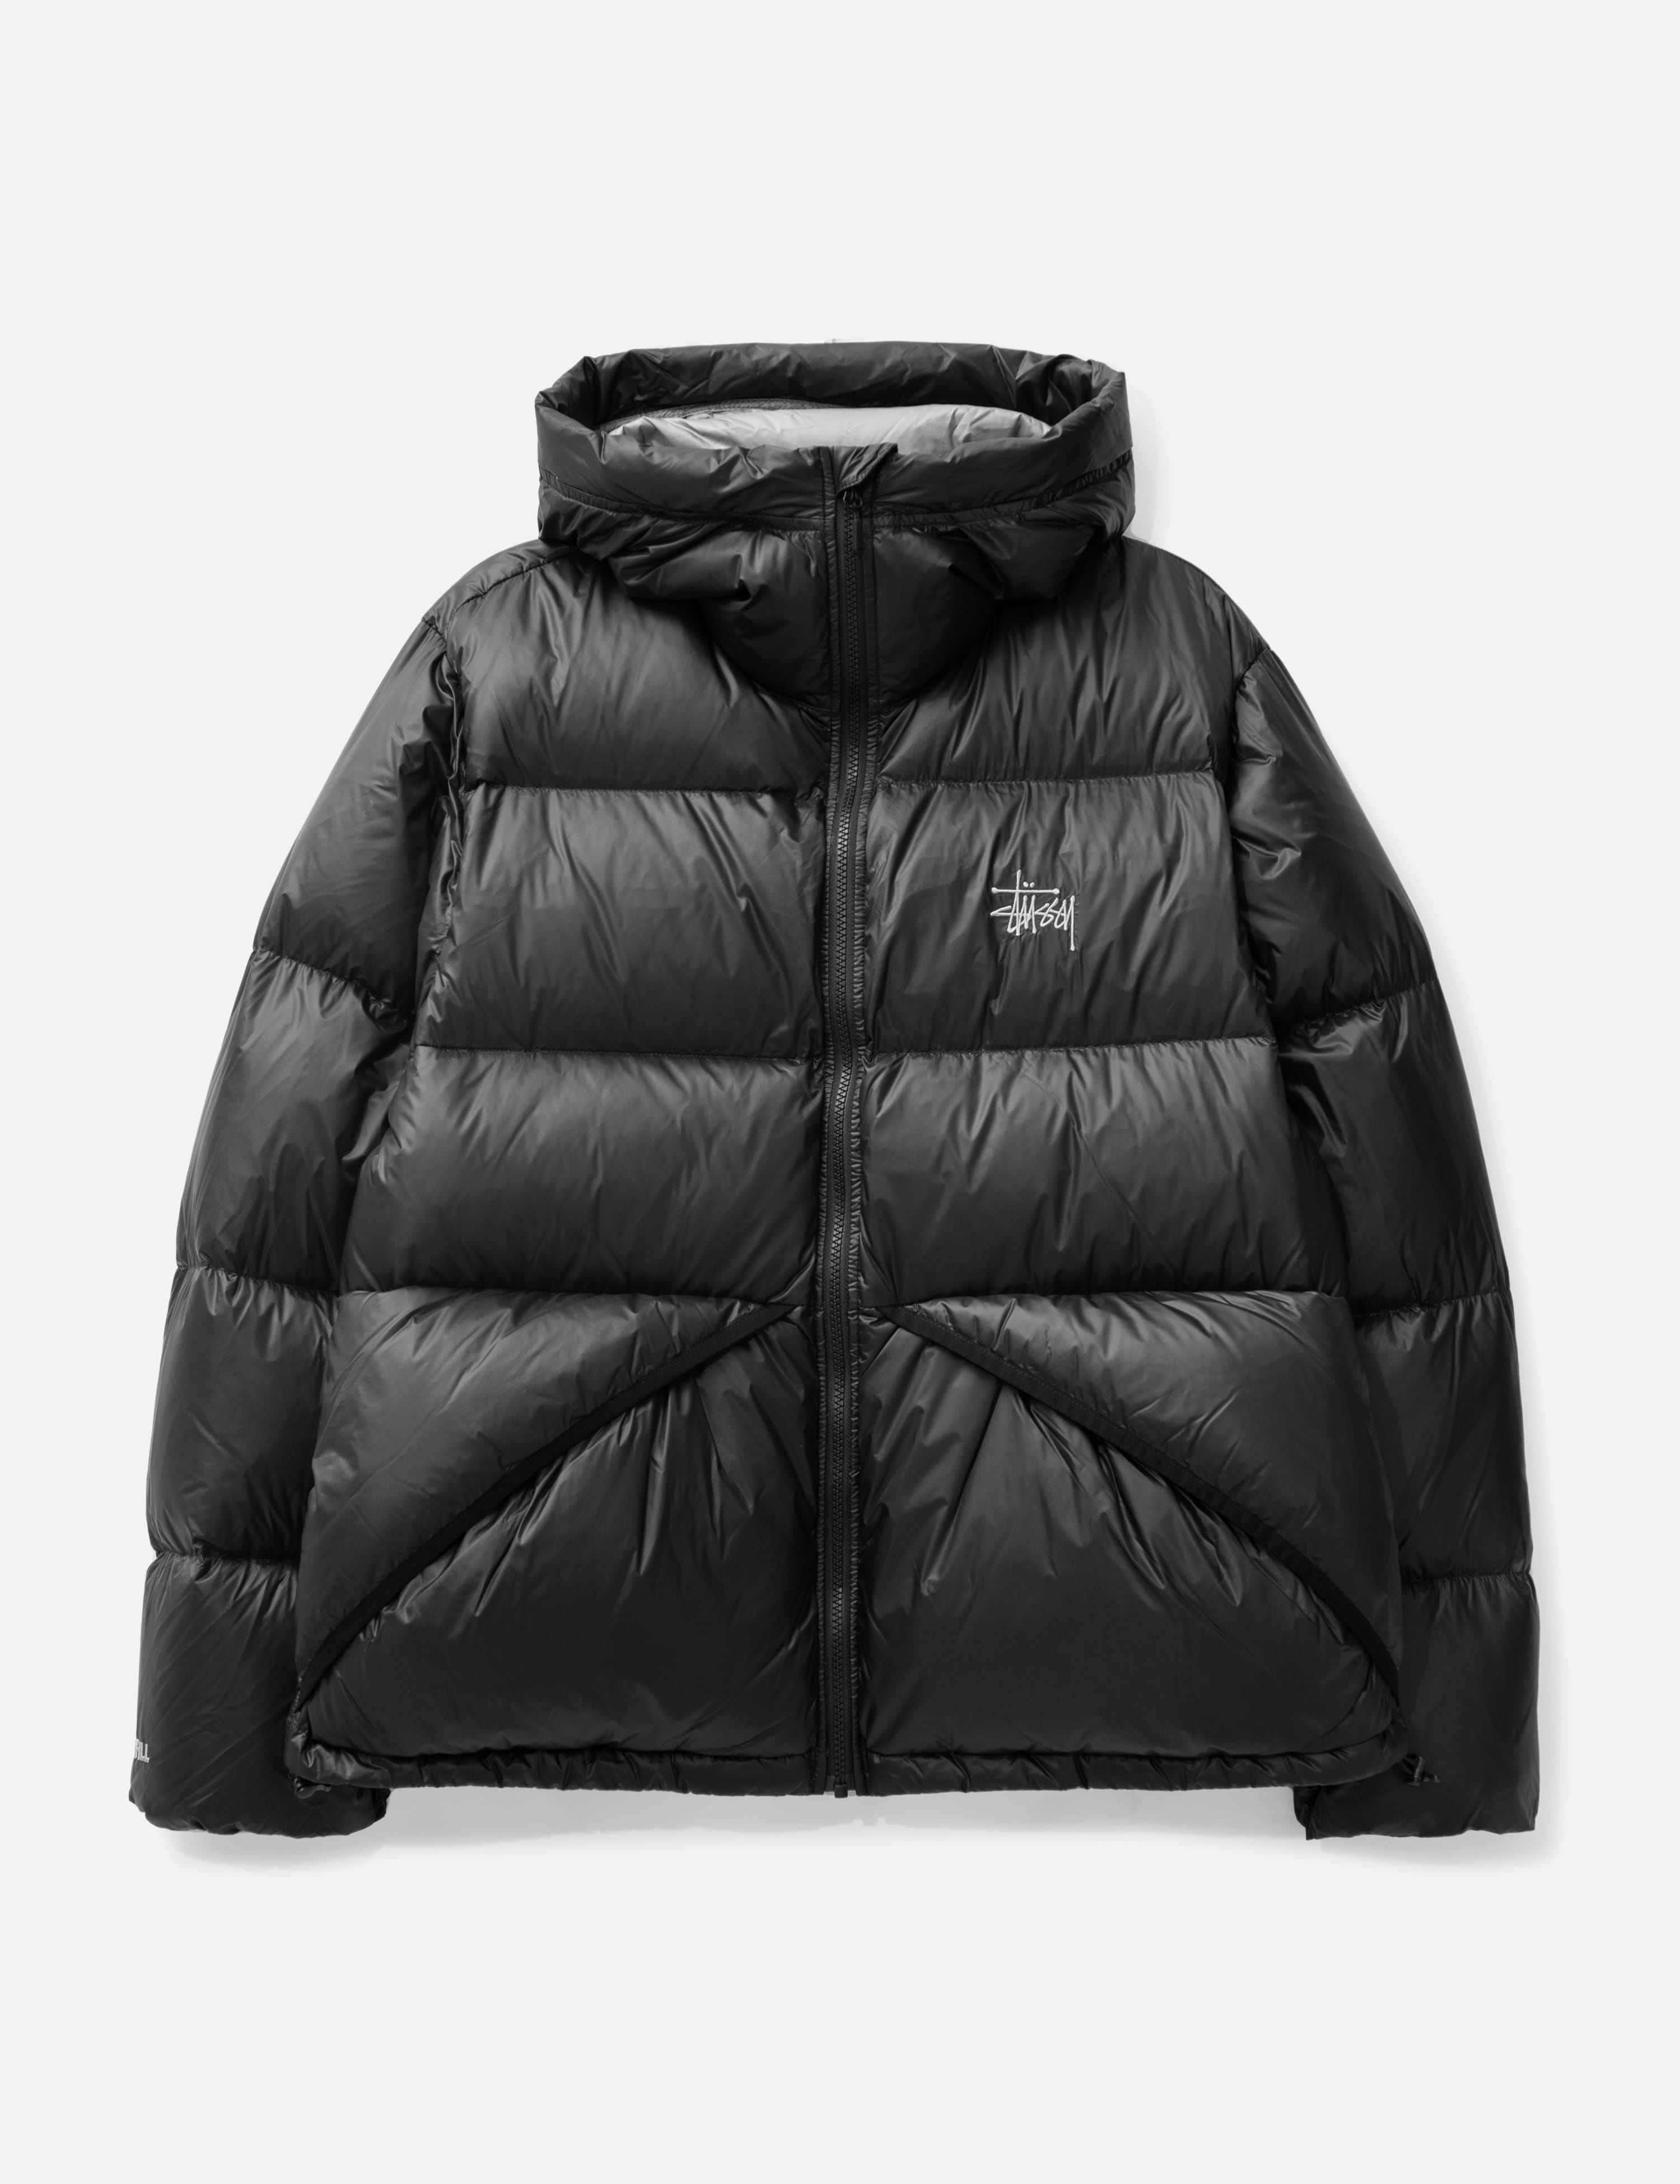 Stüssy - Micro Ripstop Down Parka | HBX - Globally Curated Fashion